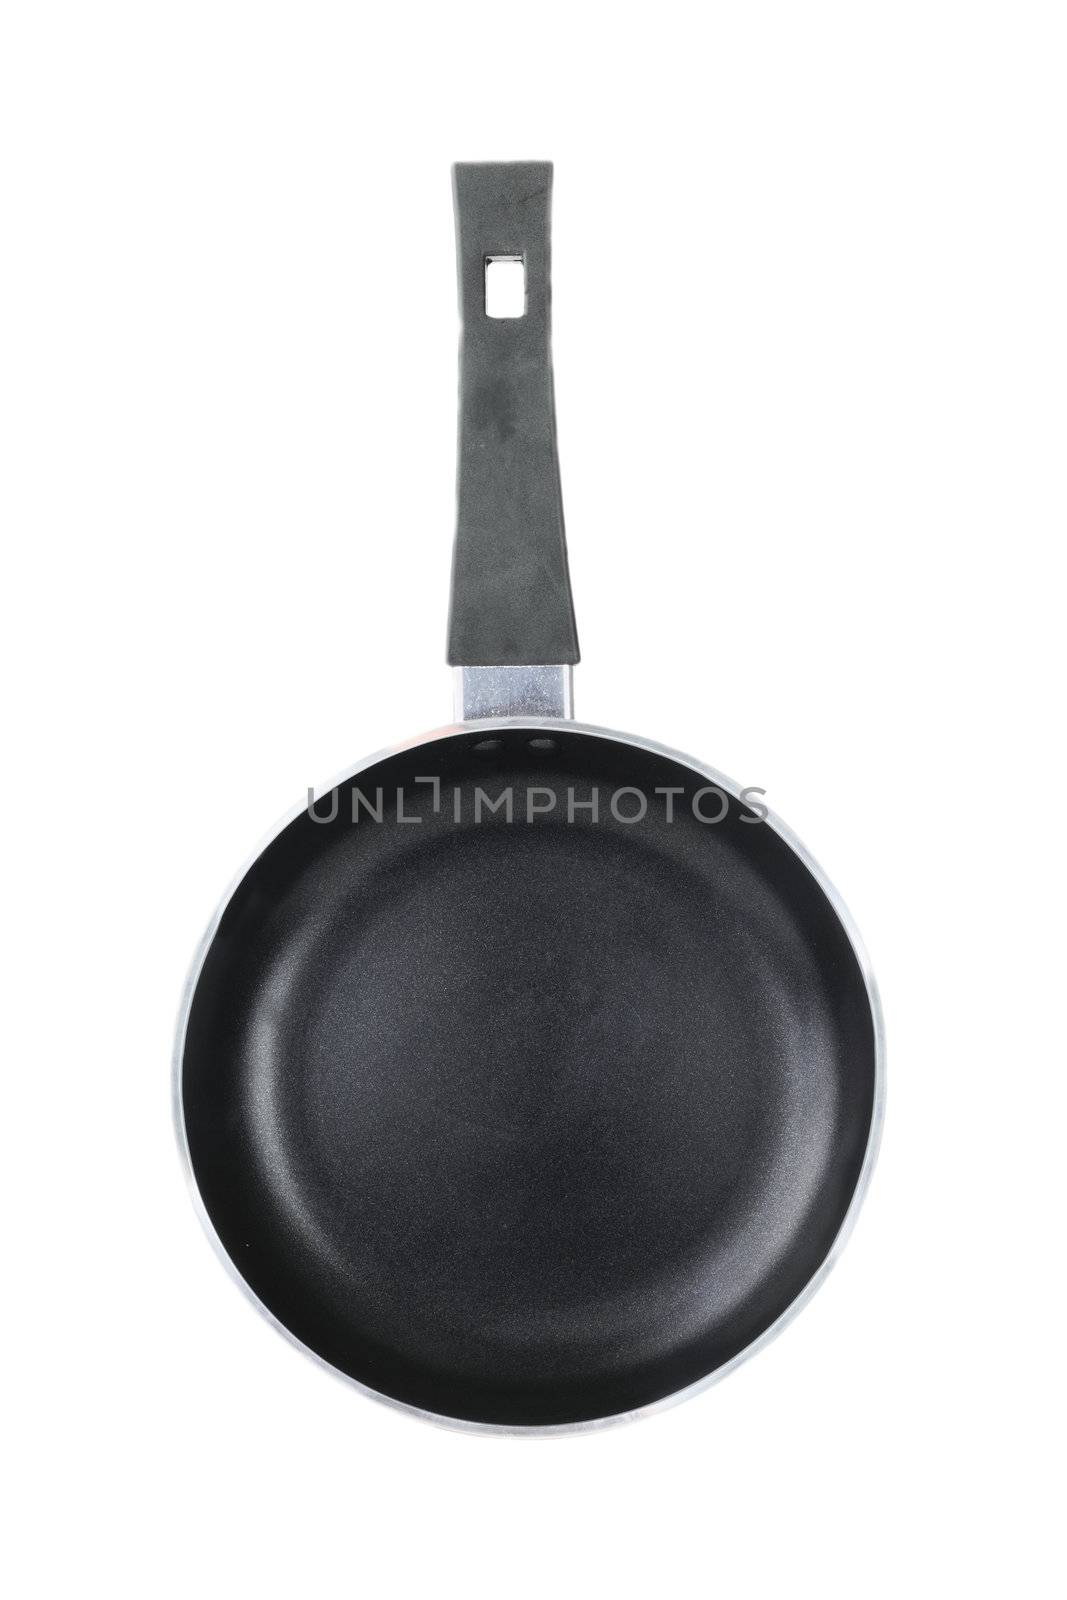 Frying Pan by StephanieFrey